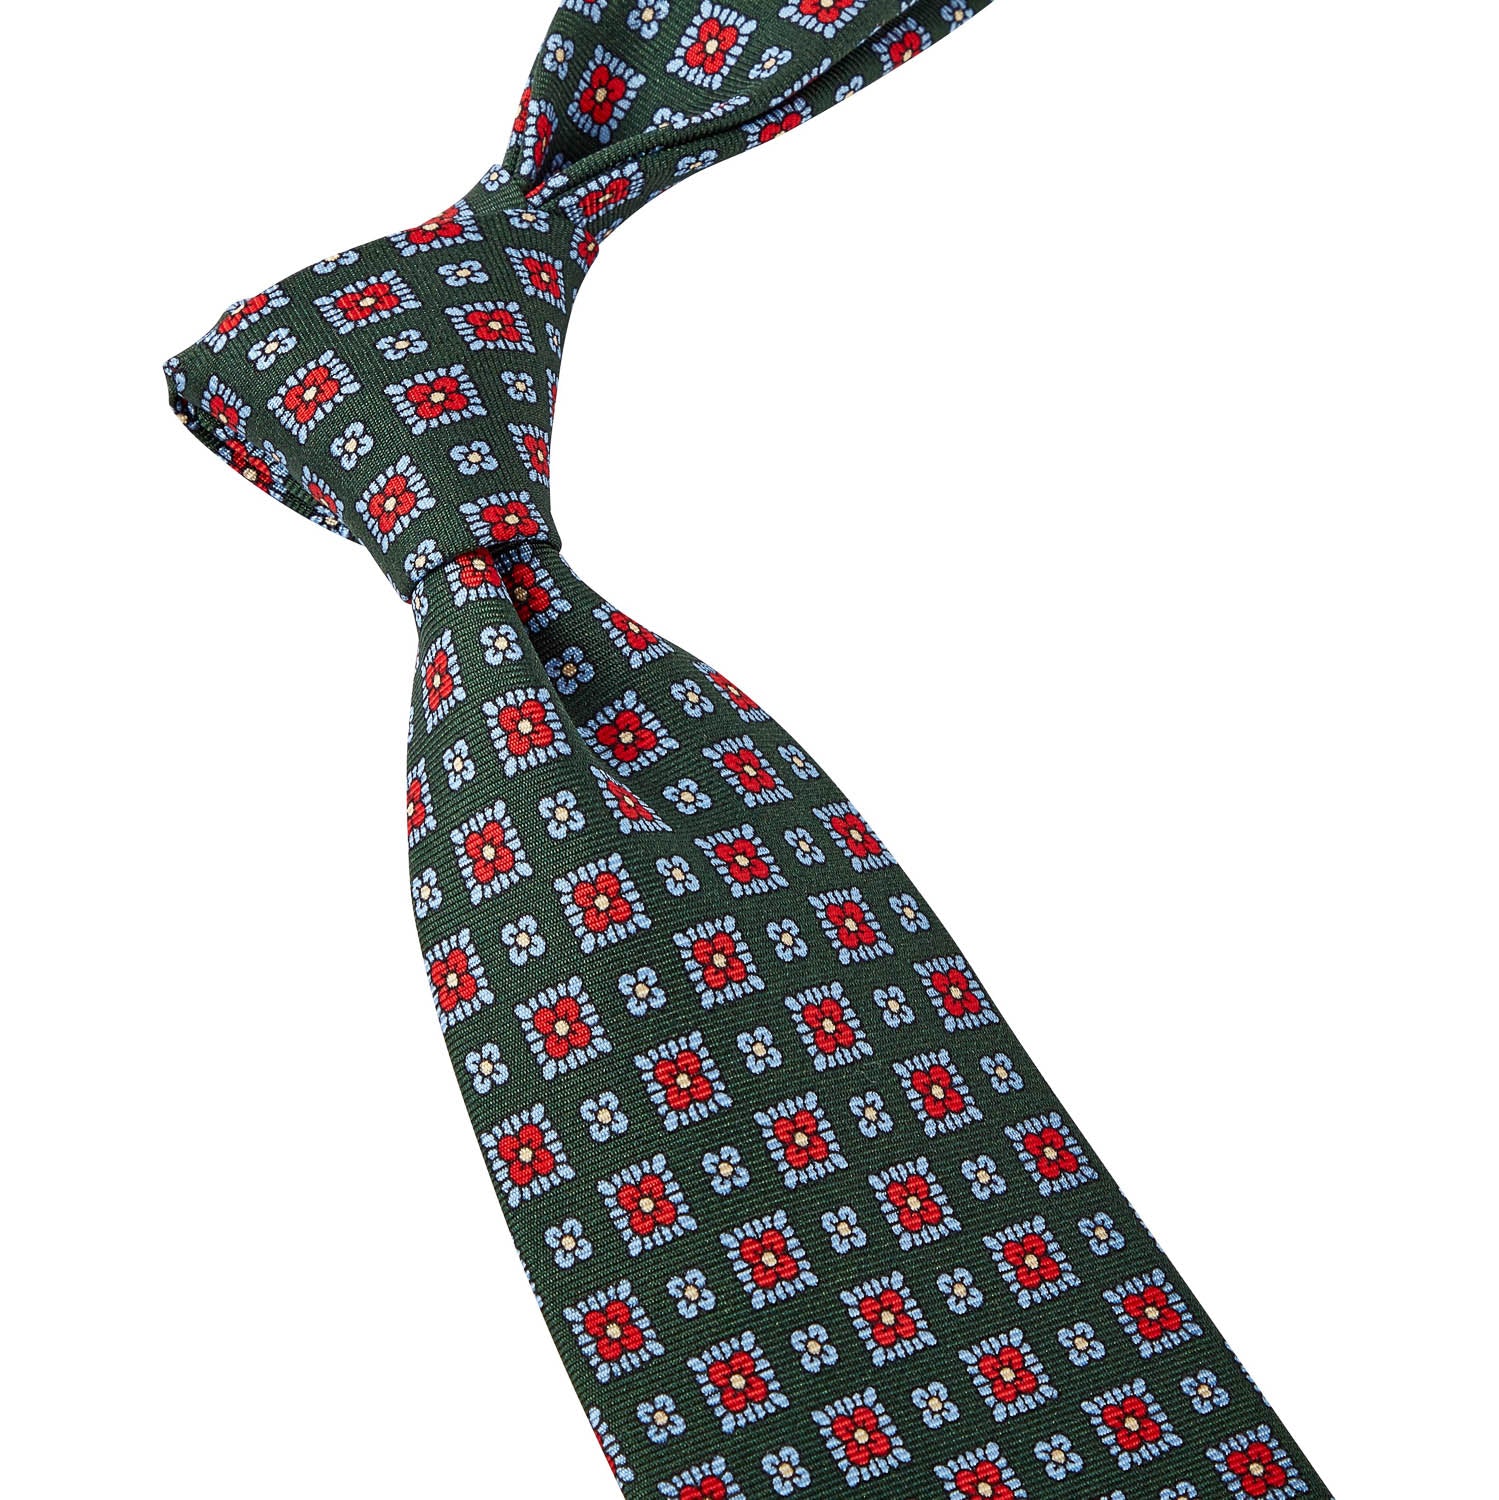 A Sovereign Grade Forest 36oz Printed Silk Maccesfield Tie with red and green designs, crafted from 100% English silk by KirbyAllison.com.